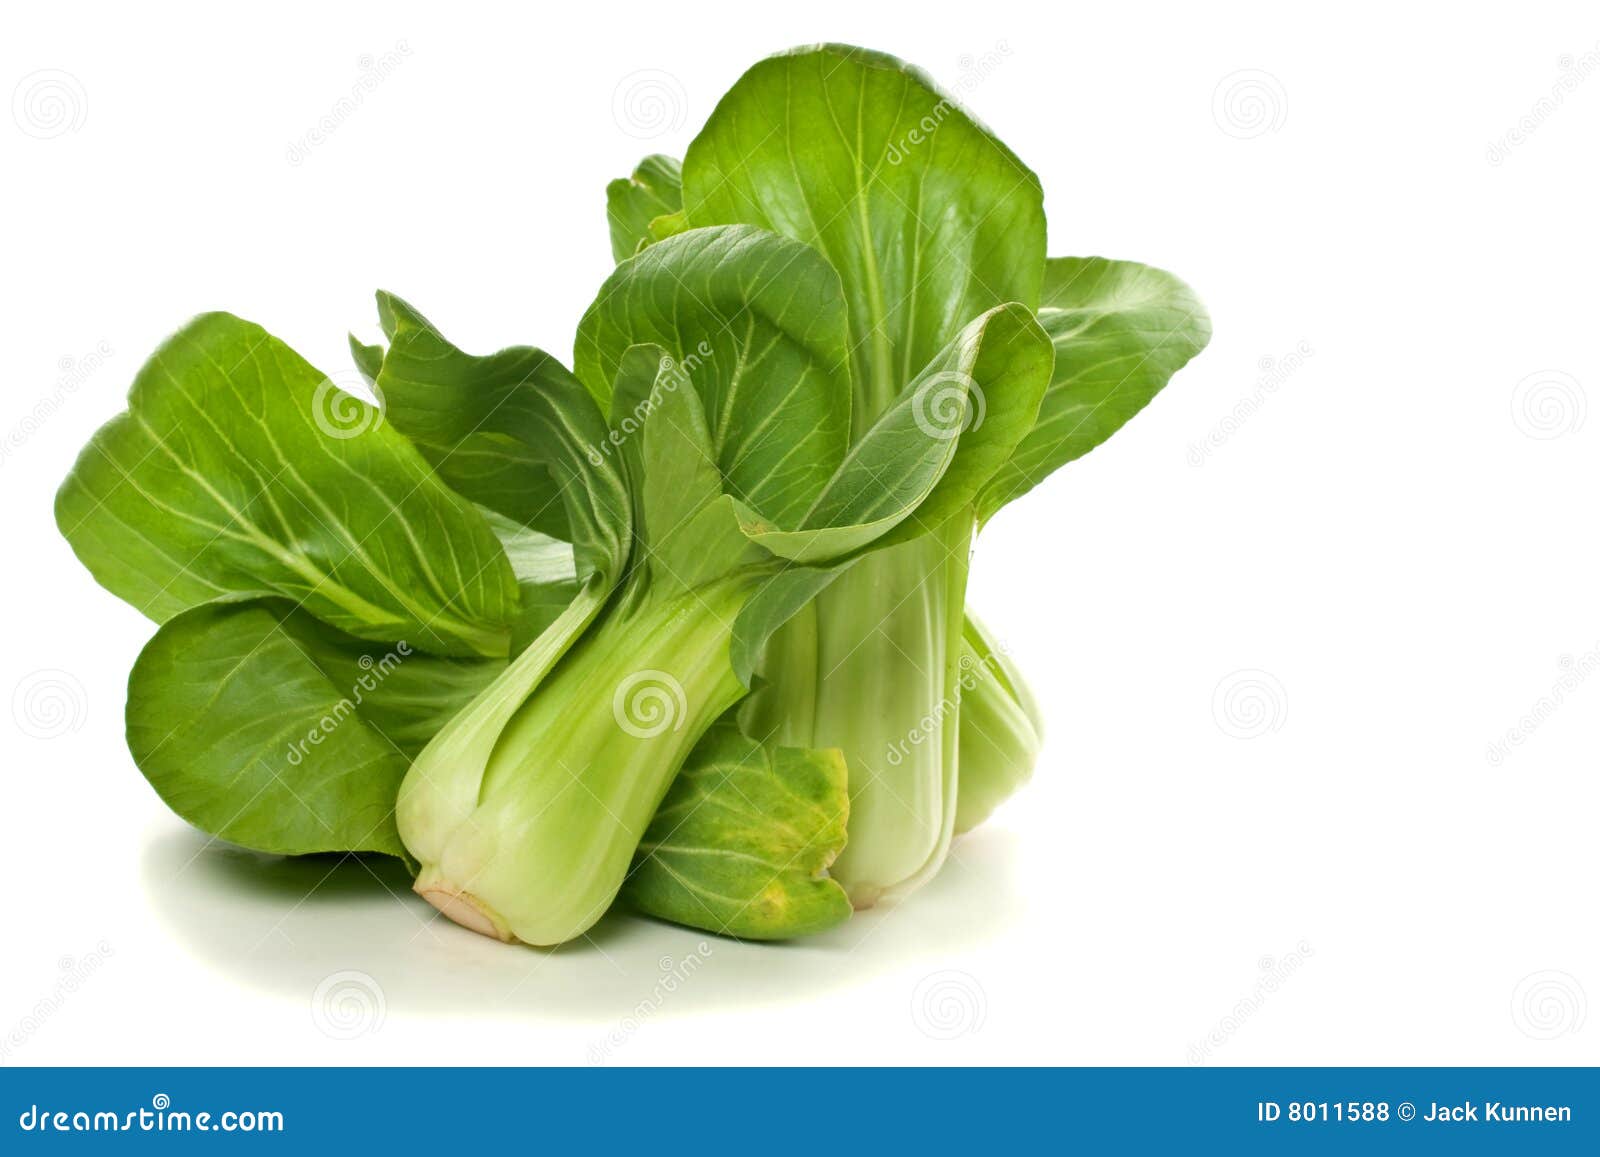 bunch of baby bok choy